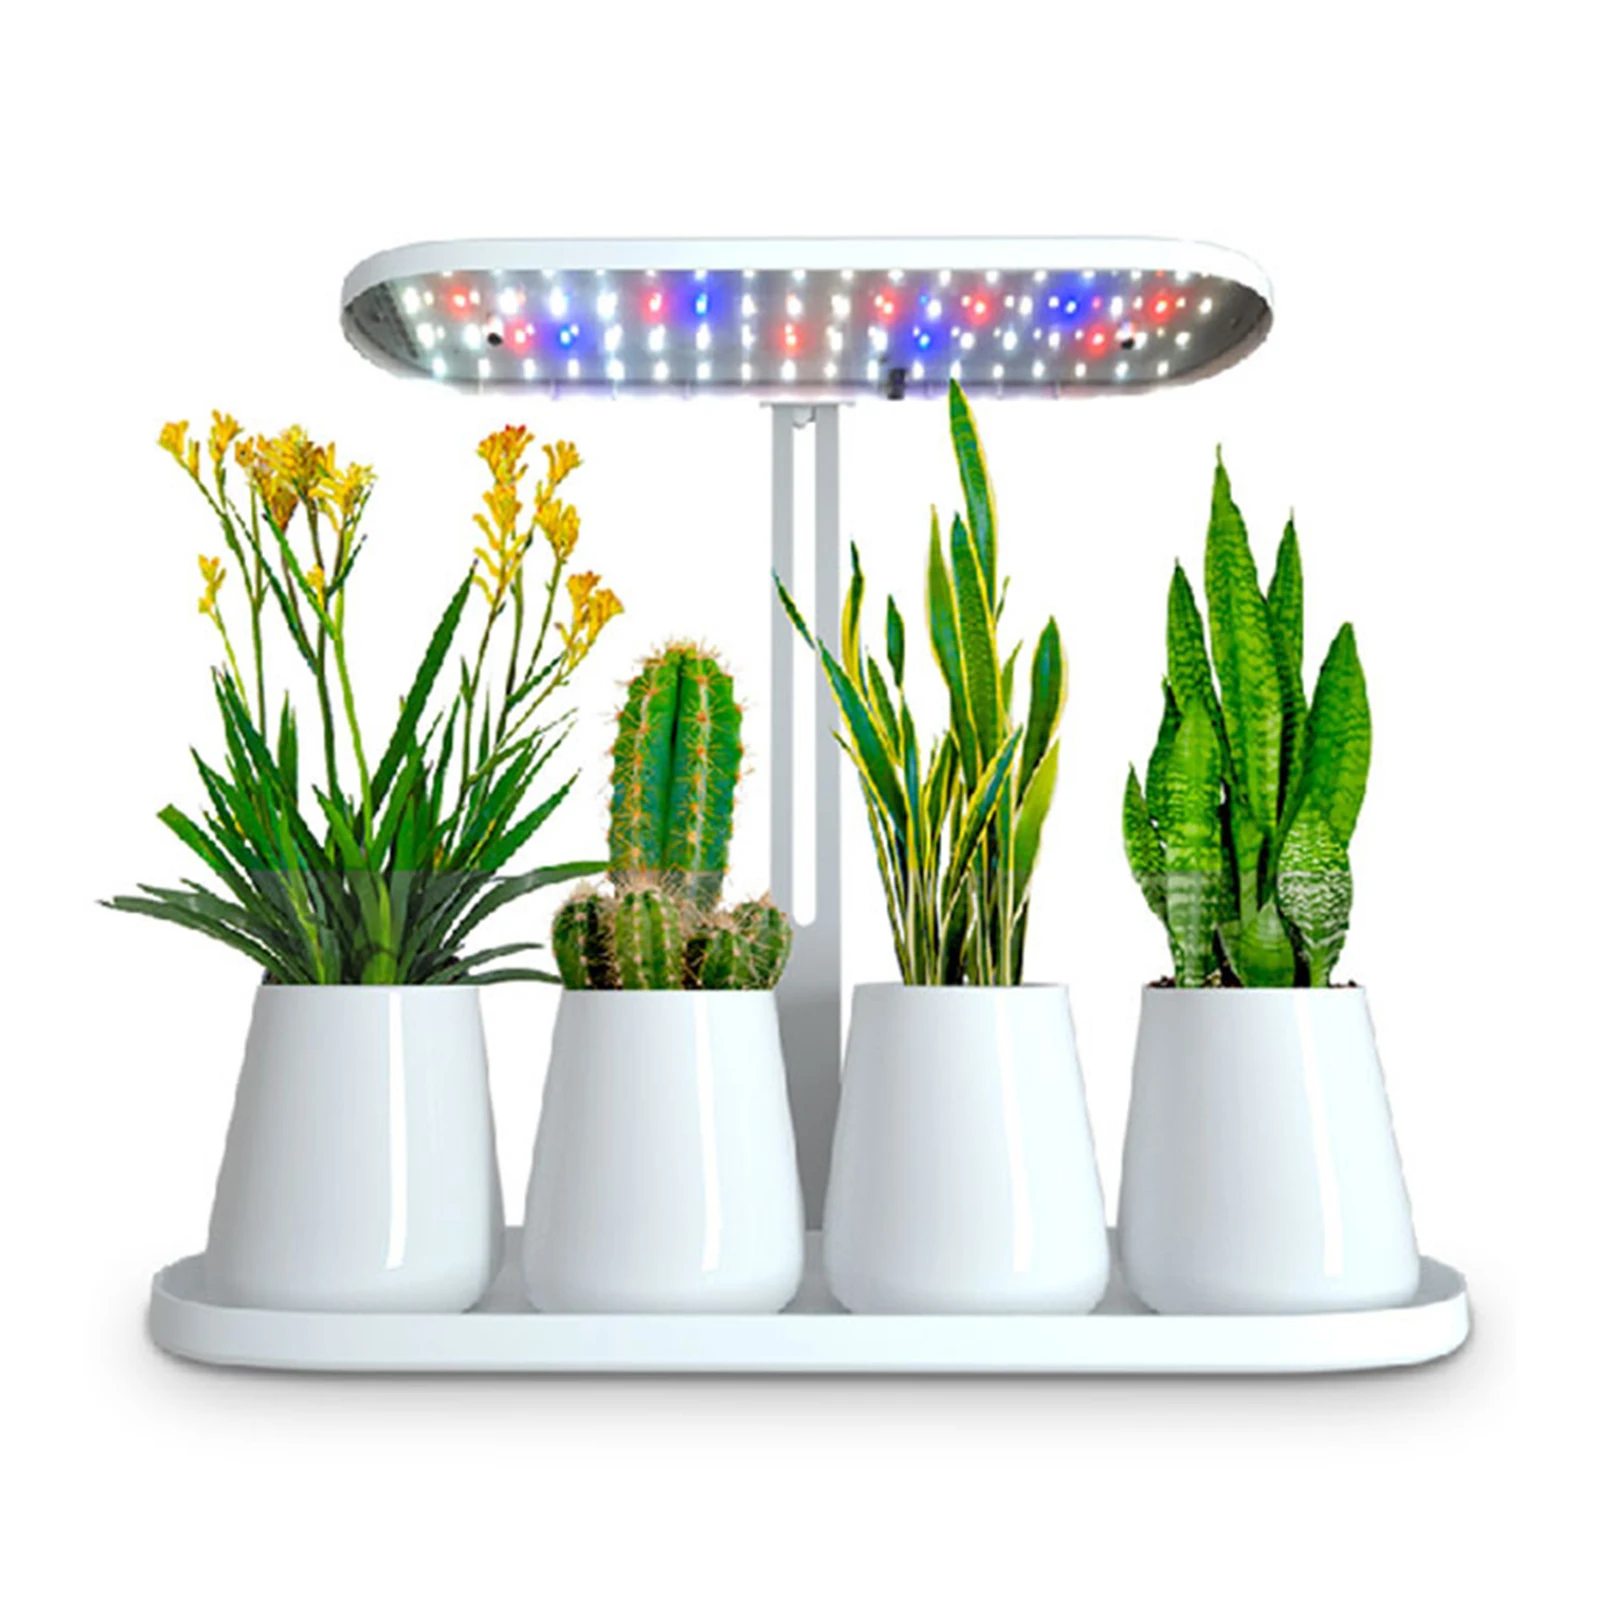 Plant Growth Light Full Spectrum Succulents And Flower LED Fill Light Adjustable Height And Brightness For Greenhouse Vegetables